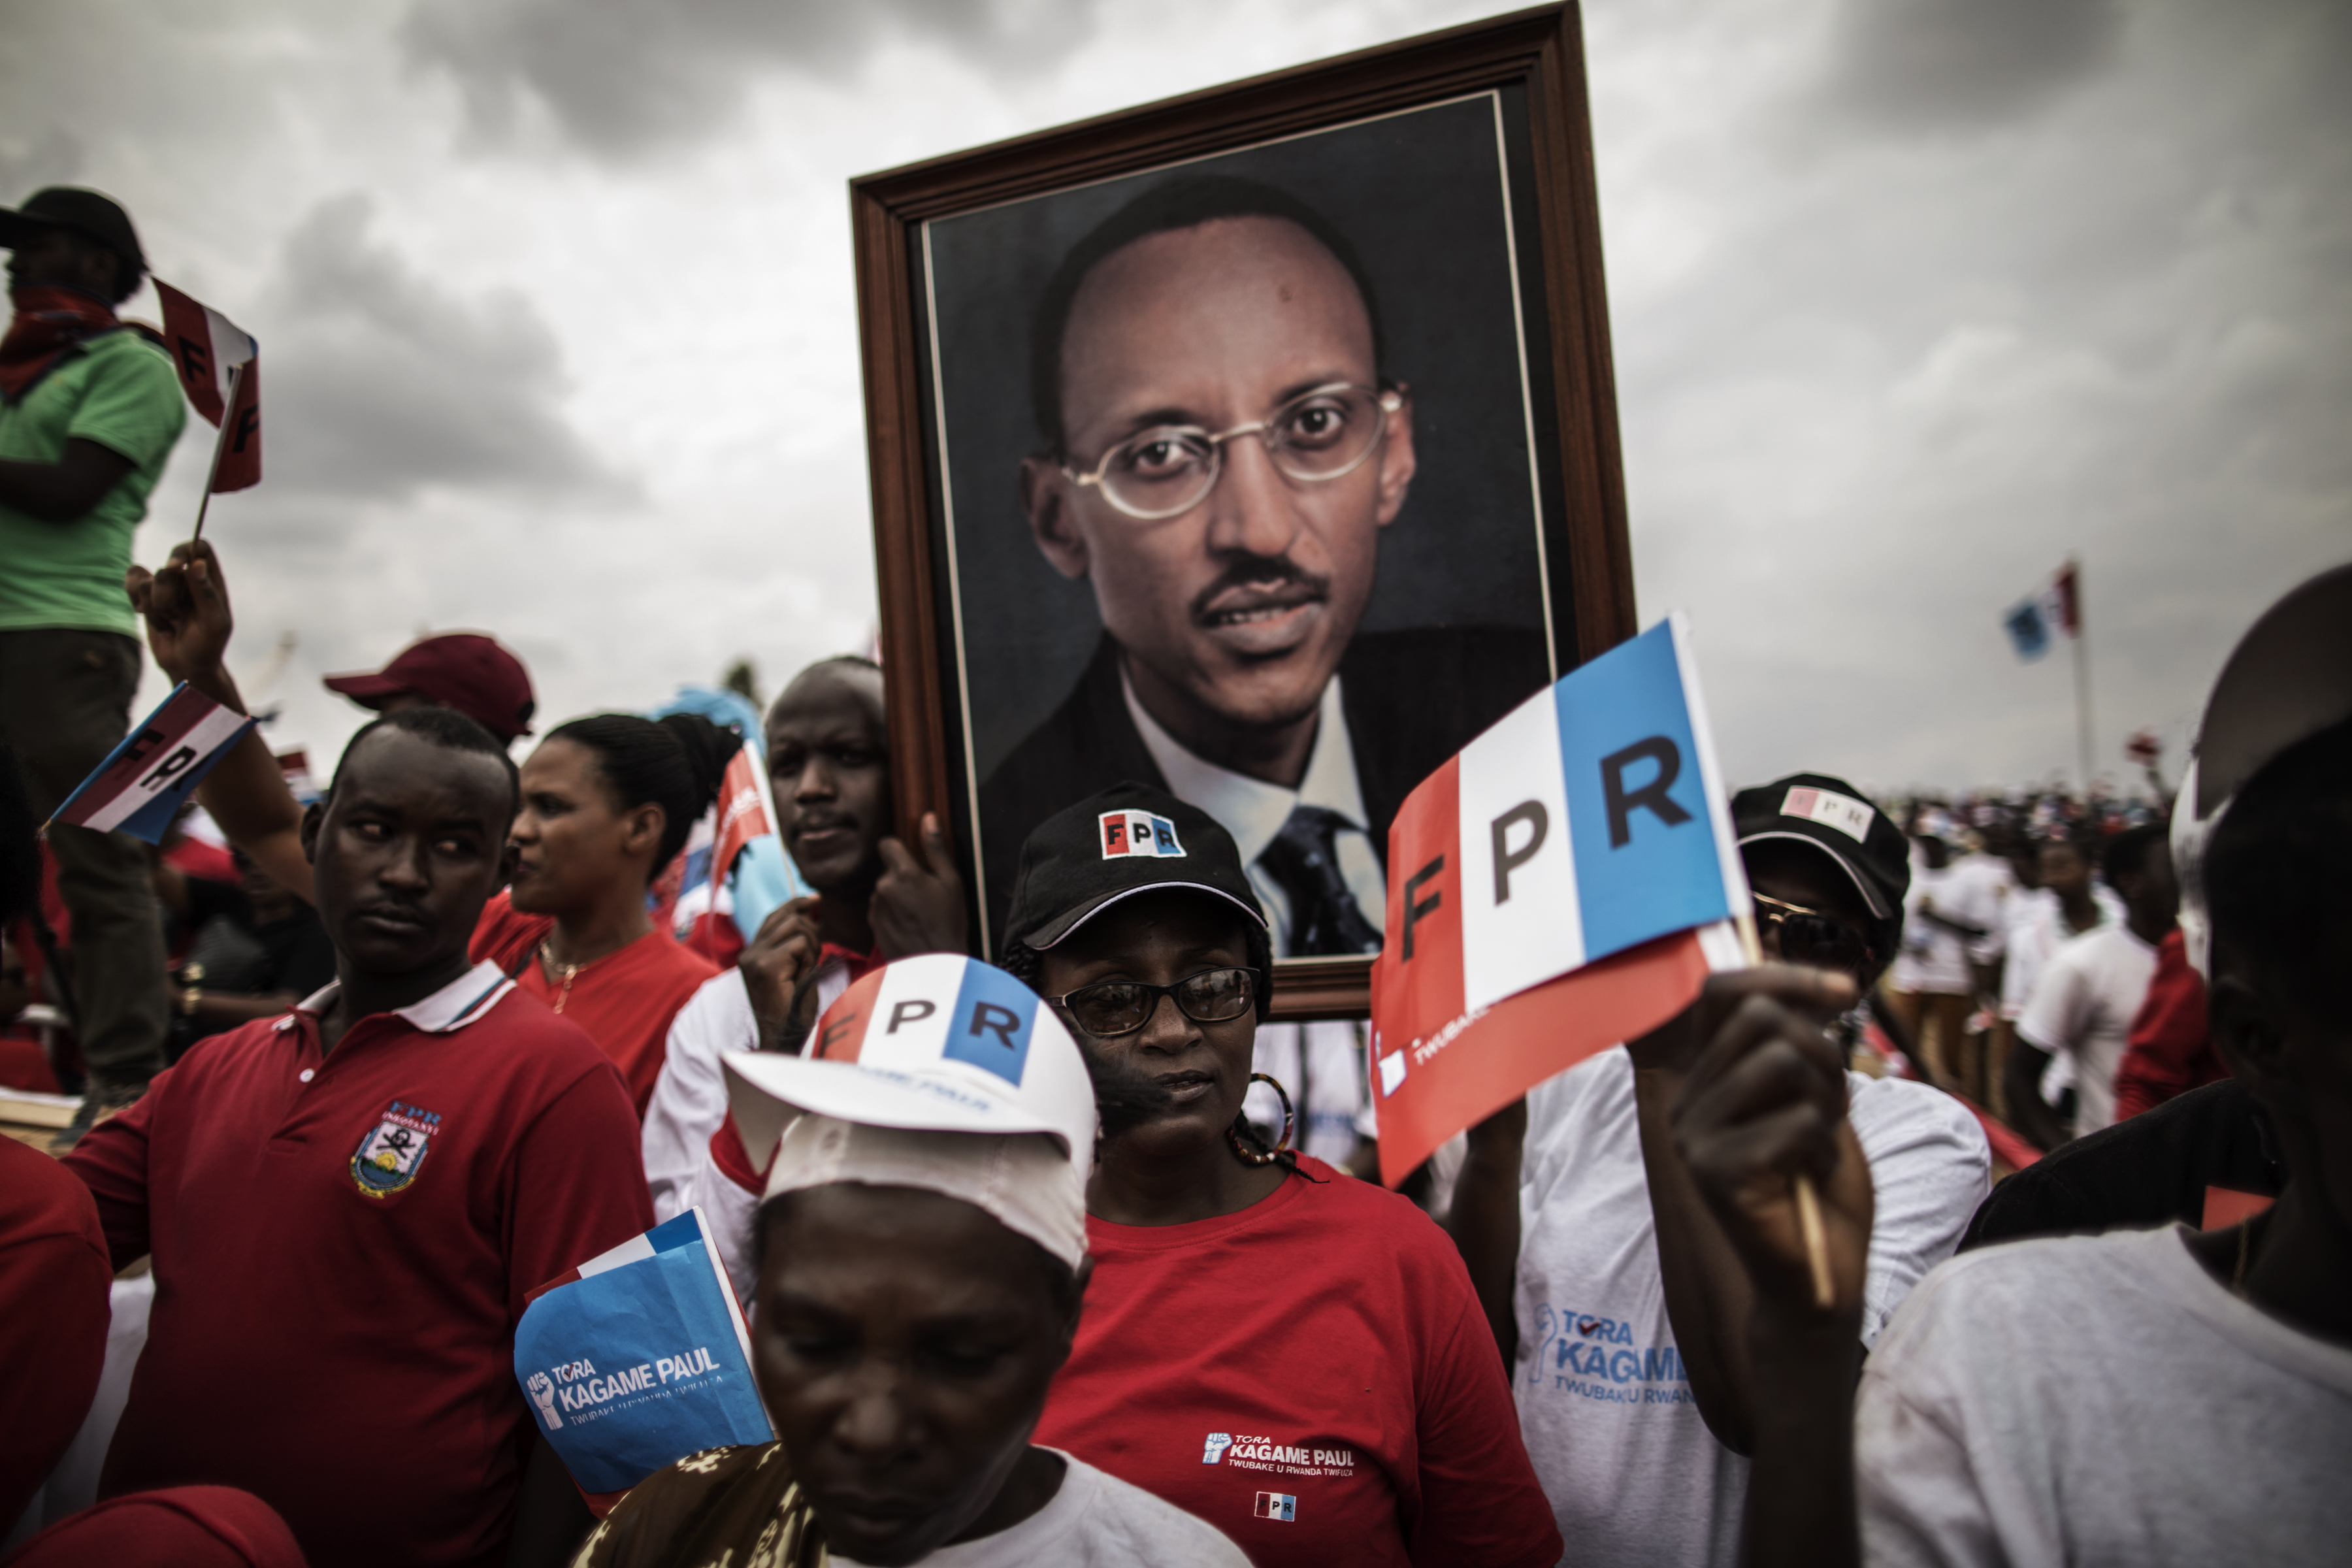 Supporters of incumbent President Paul Kagame carry a large photograph of him during the campaign's closing rally in Kigali, on August 2, 2017. (Marco Longari—AFP/Getty Images)